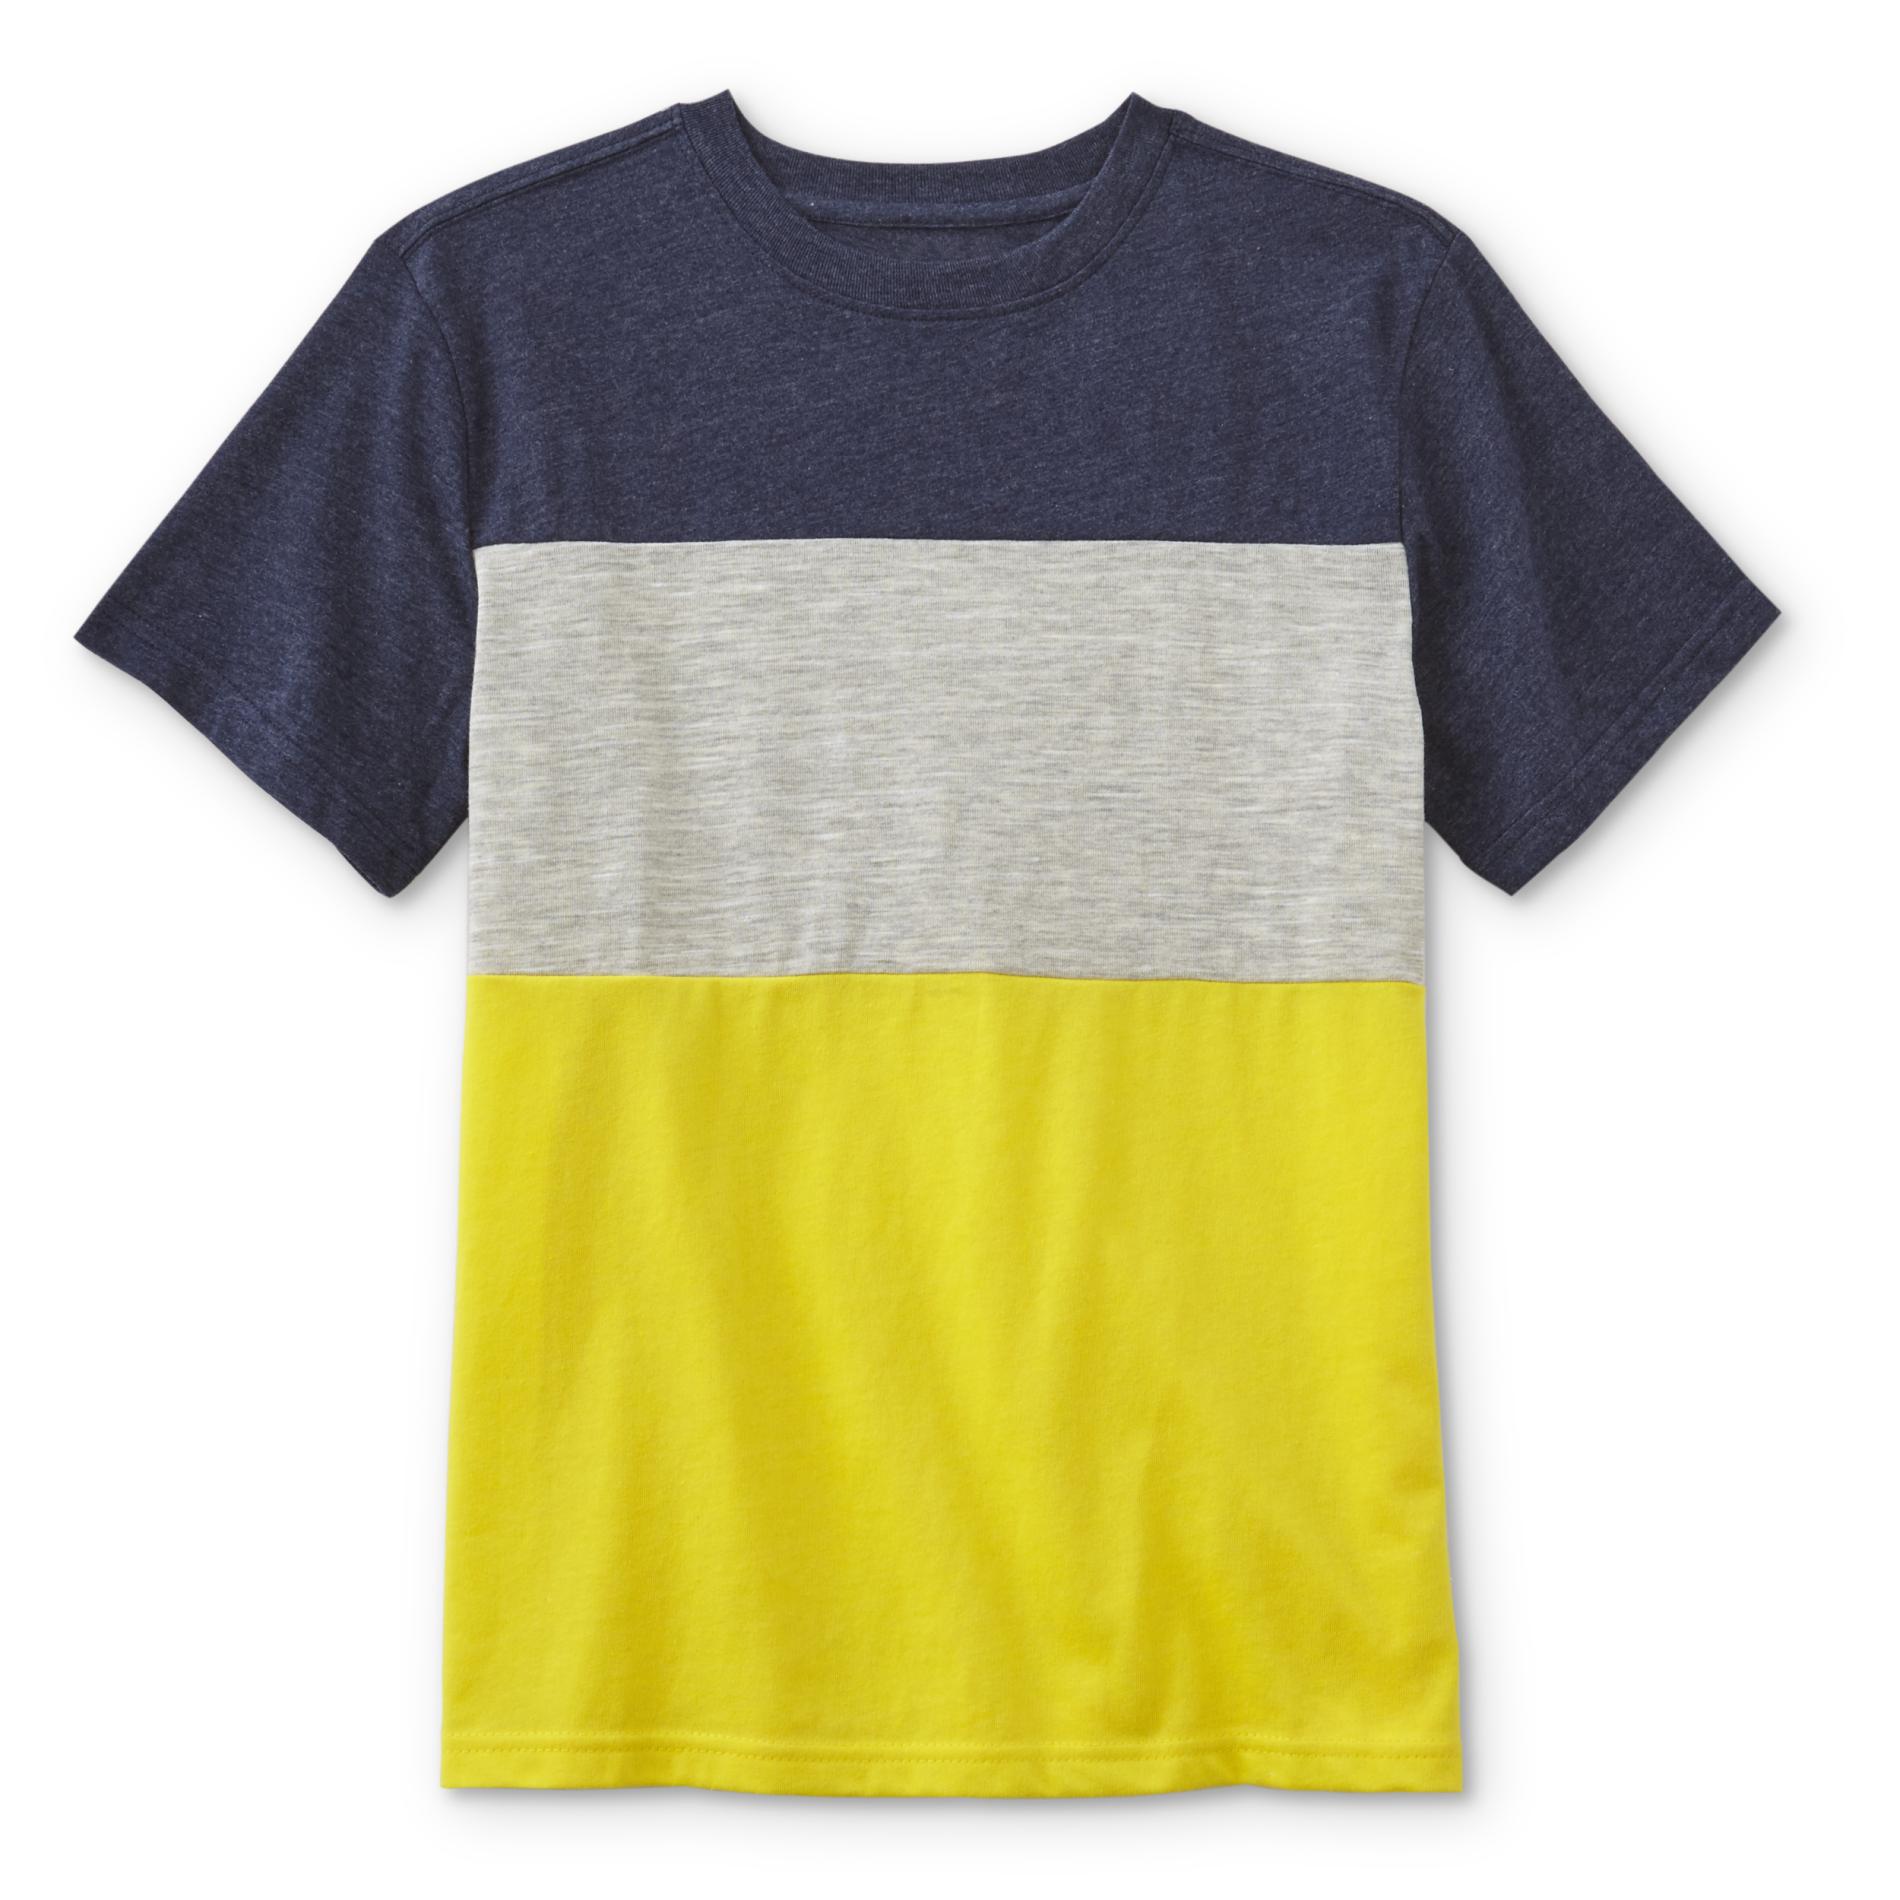 Simply Styled Boys' T-Shirt - Colorblock